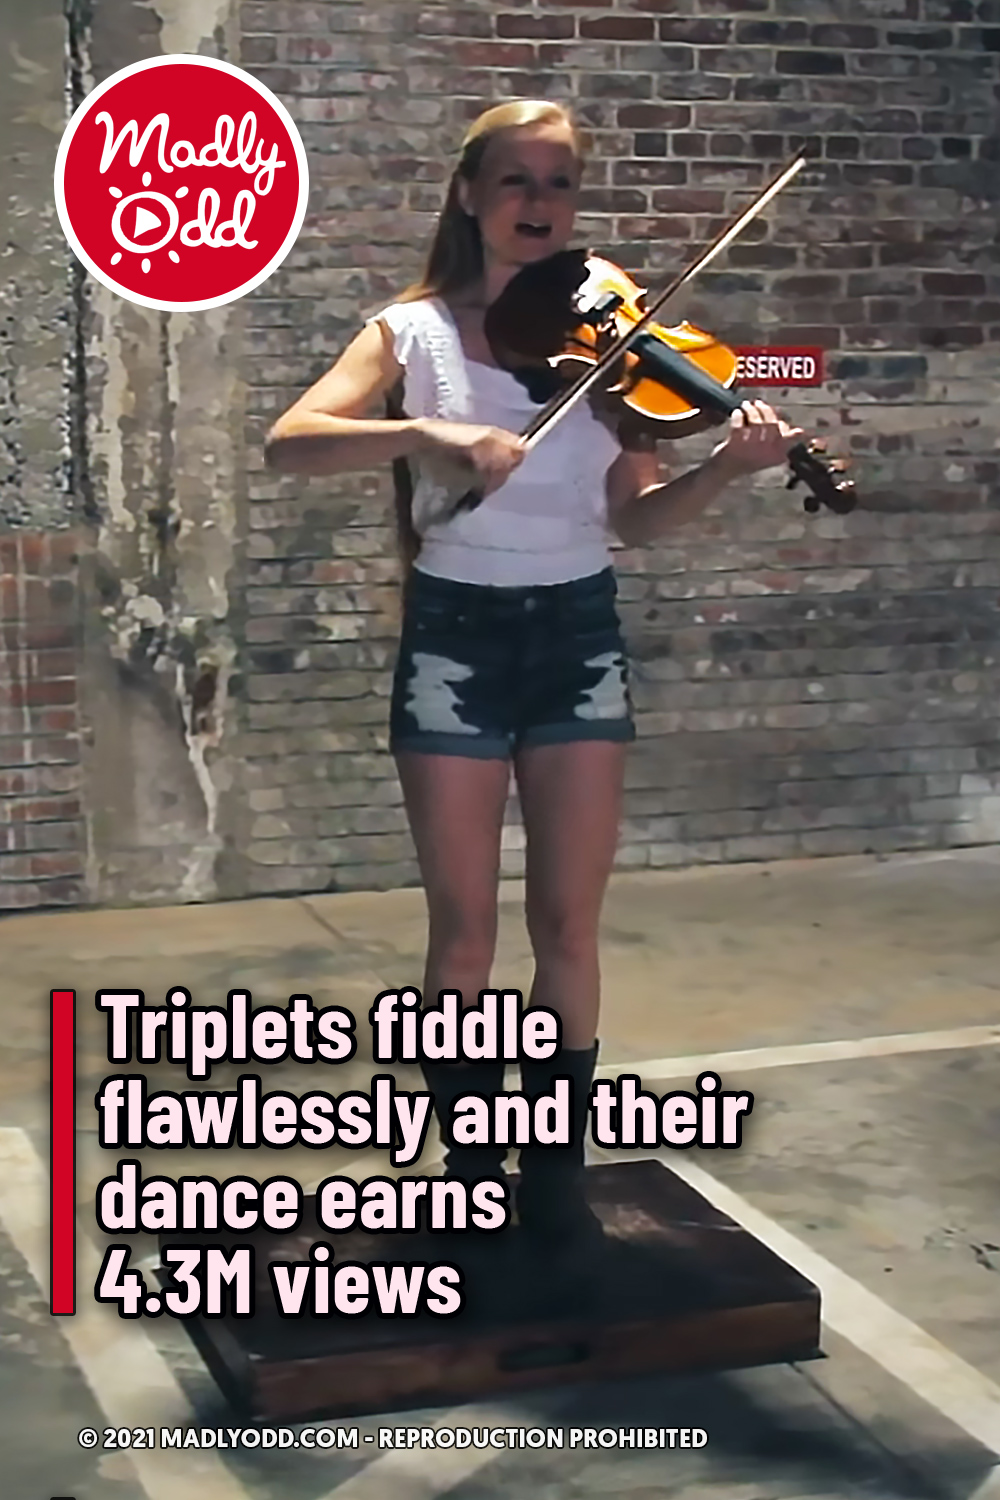 Triplets fiddle flawlessly and their dance earns 4.3M views